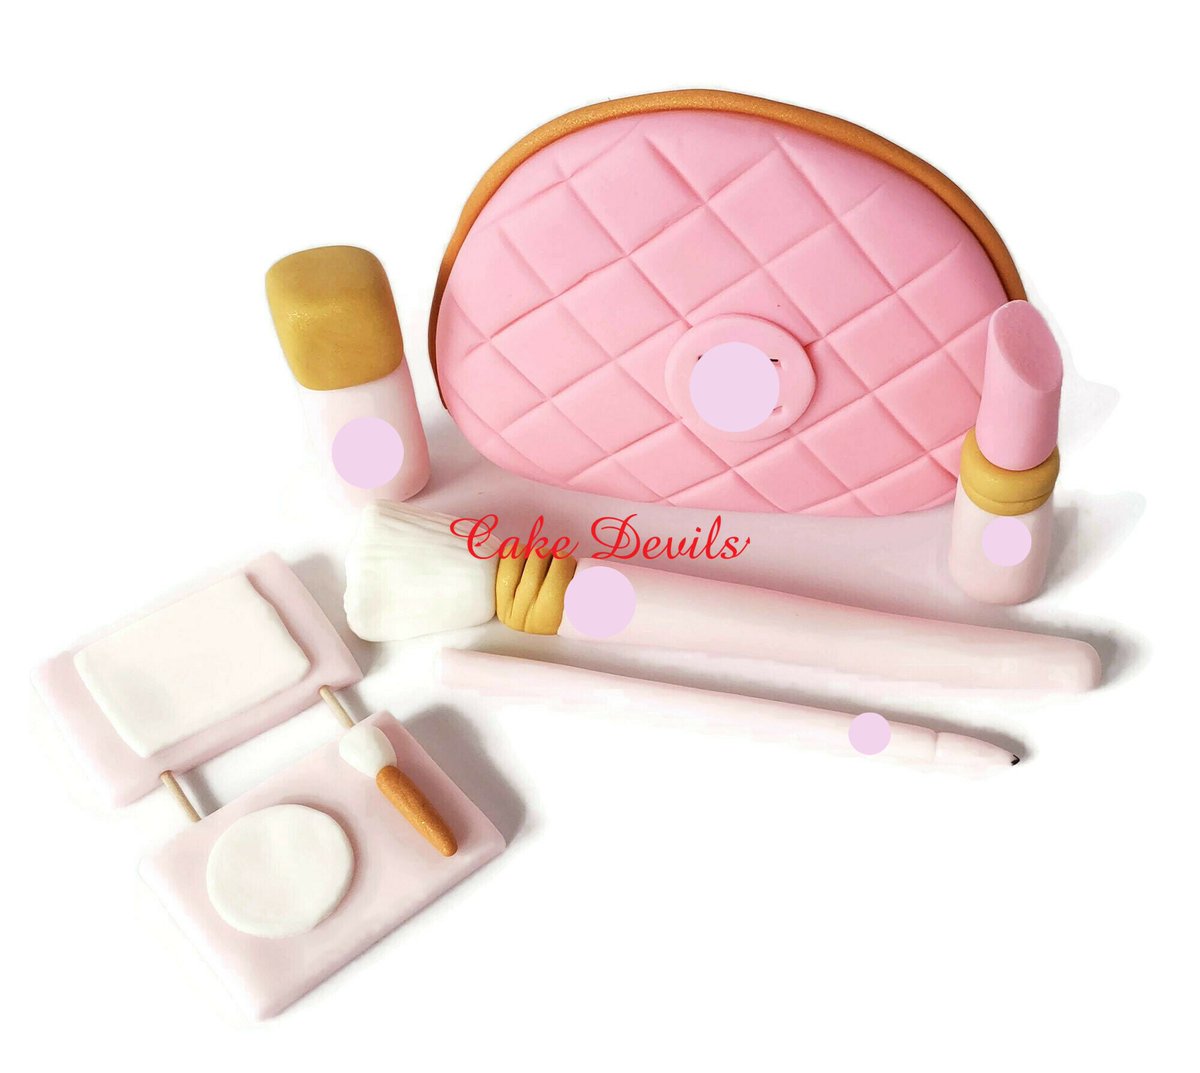 Fondant Makeup Cake Toppers with Cosmetic Bag Cake Decorations, Make up Cake, brush, eye shadow, eye liner and more 
Find it here etsy.com/listing/102086…
^^^Click the link above to learn more!^^^
#CakeDecorations #CosmetologistMakeup